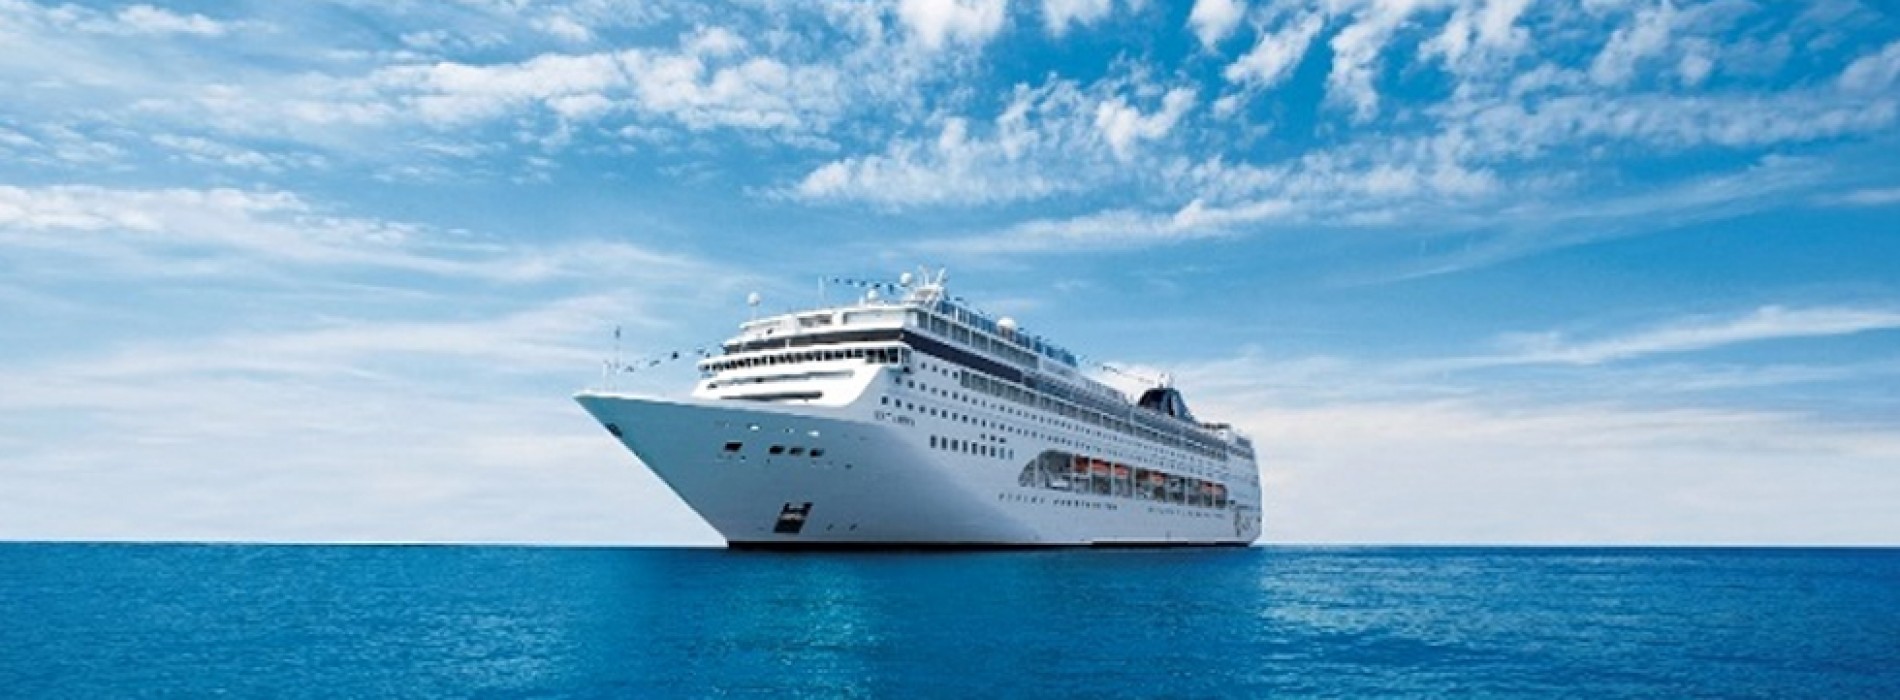 ‘Ease policies, improve infra to develop cruise tourism’